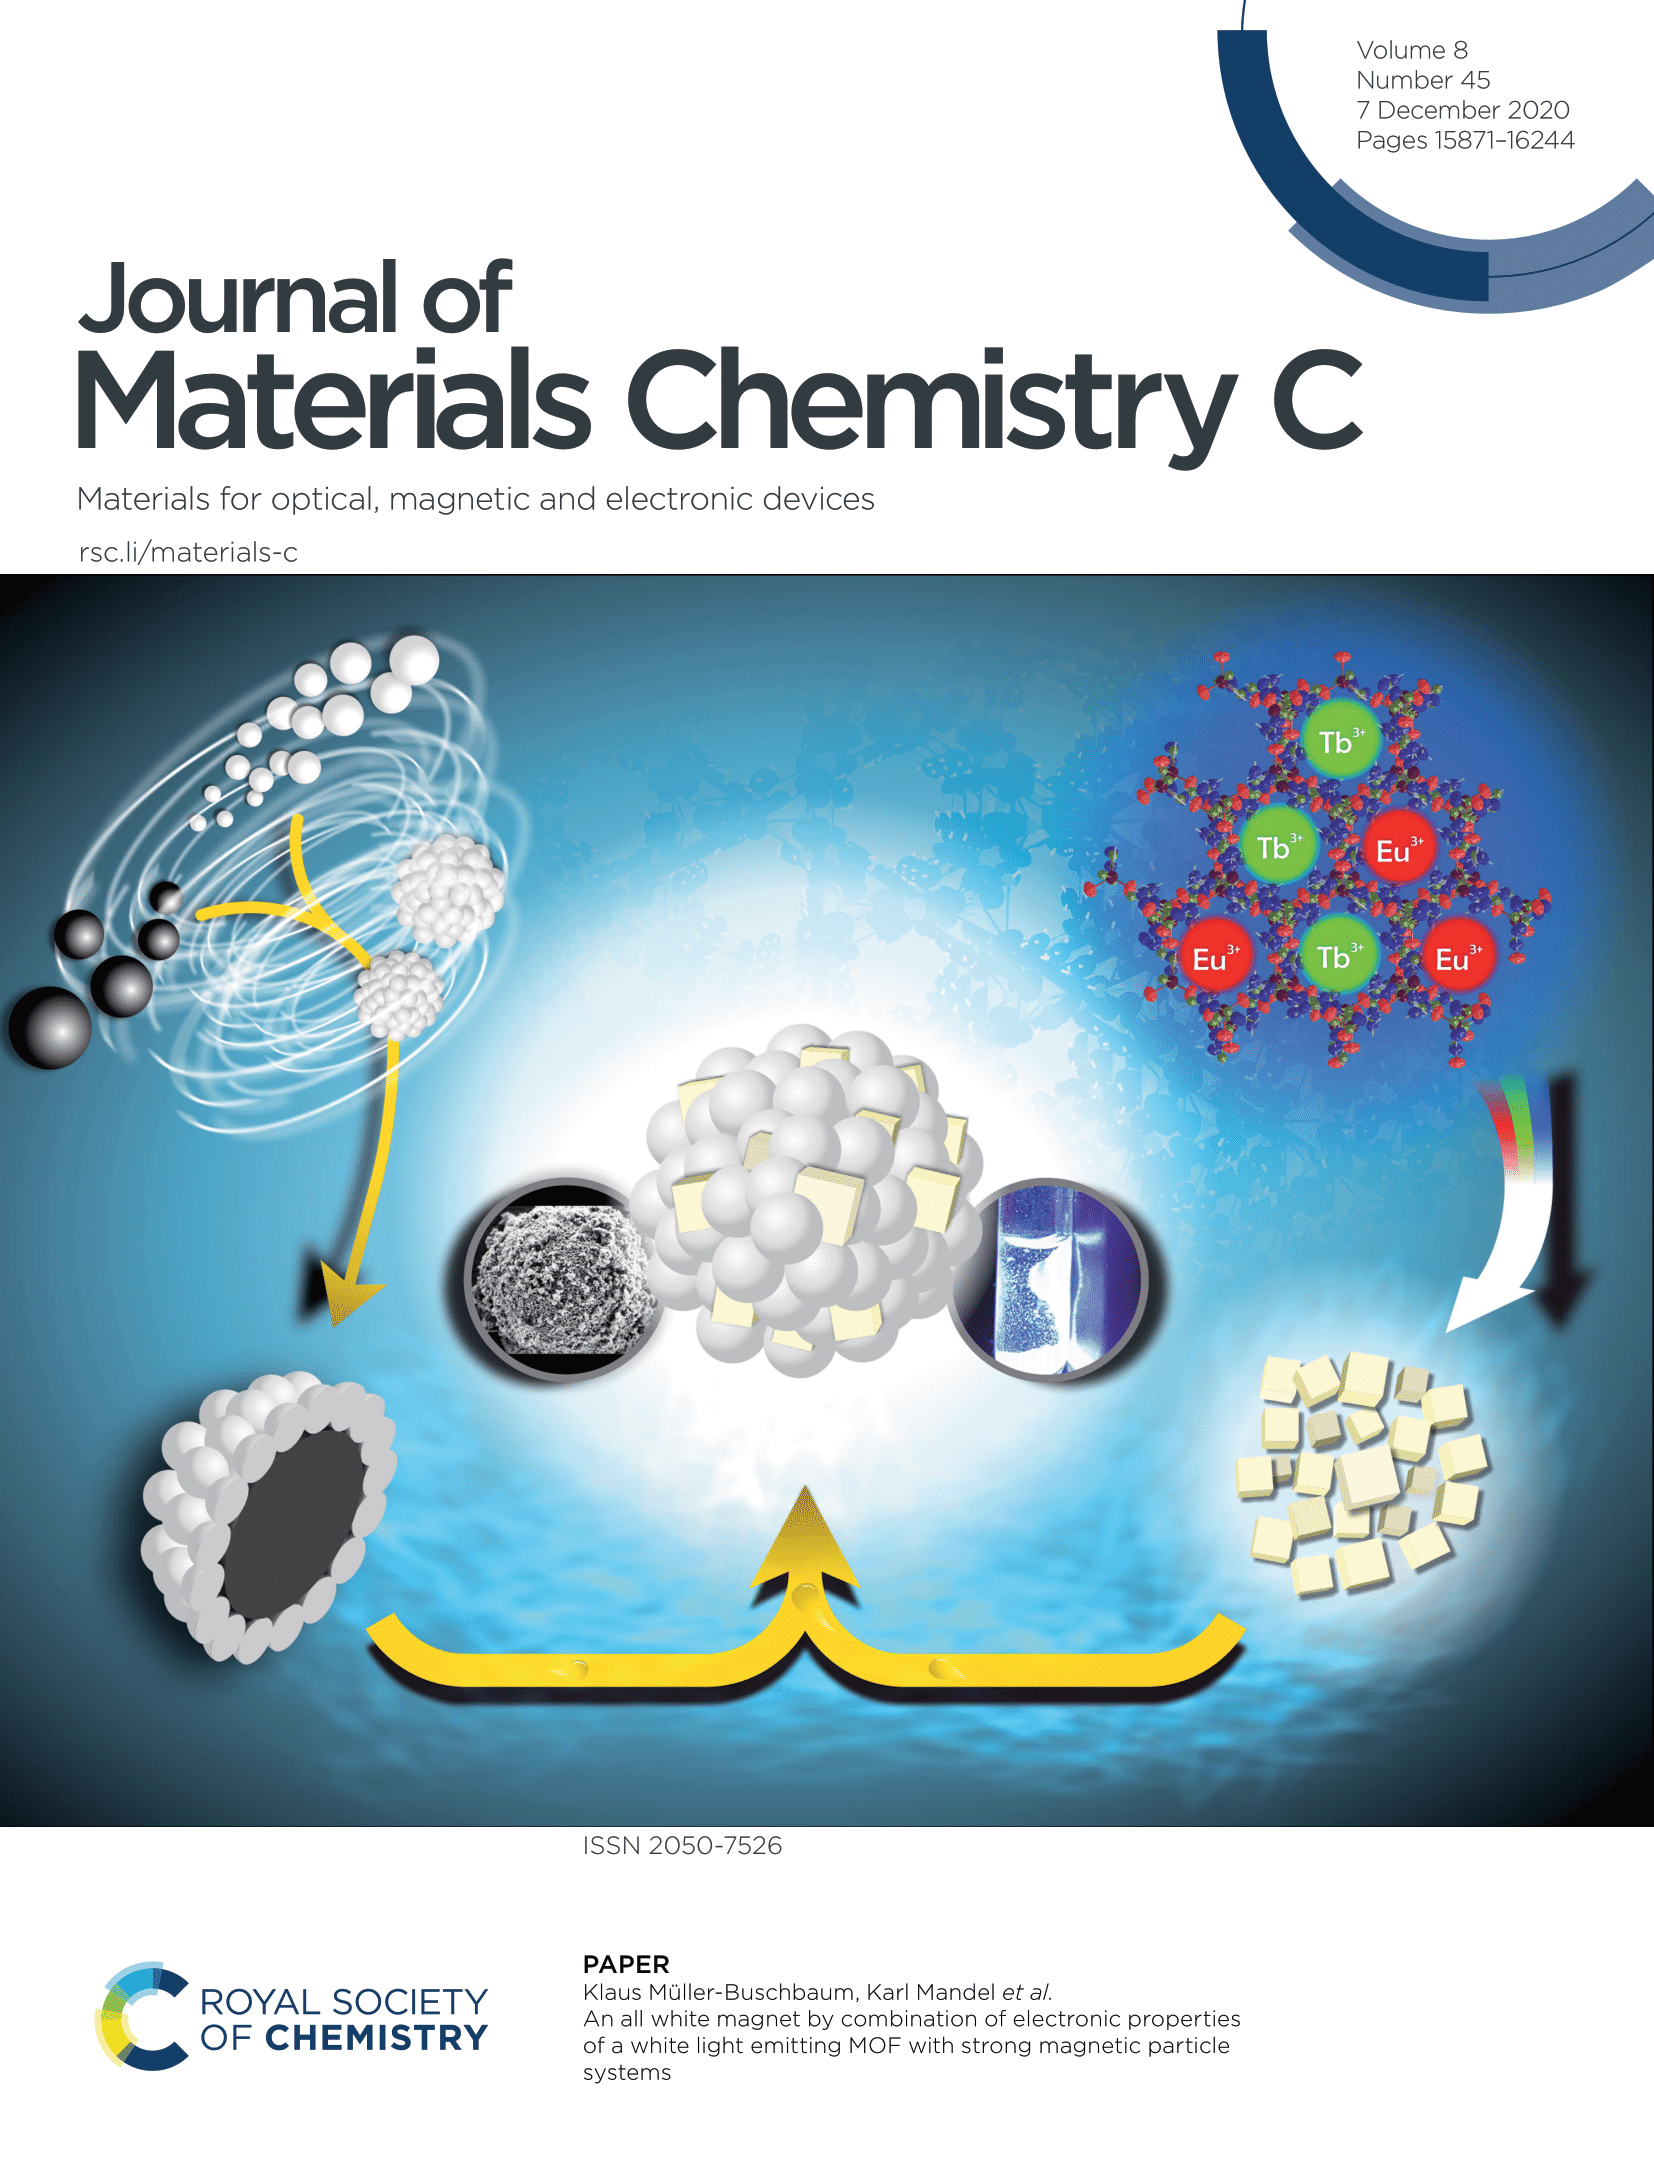 New cover art – Journal of Materials Chemistry C › Department of ...